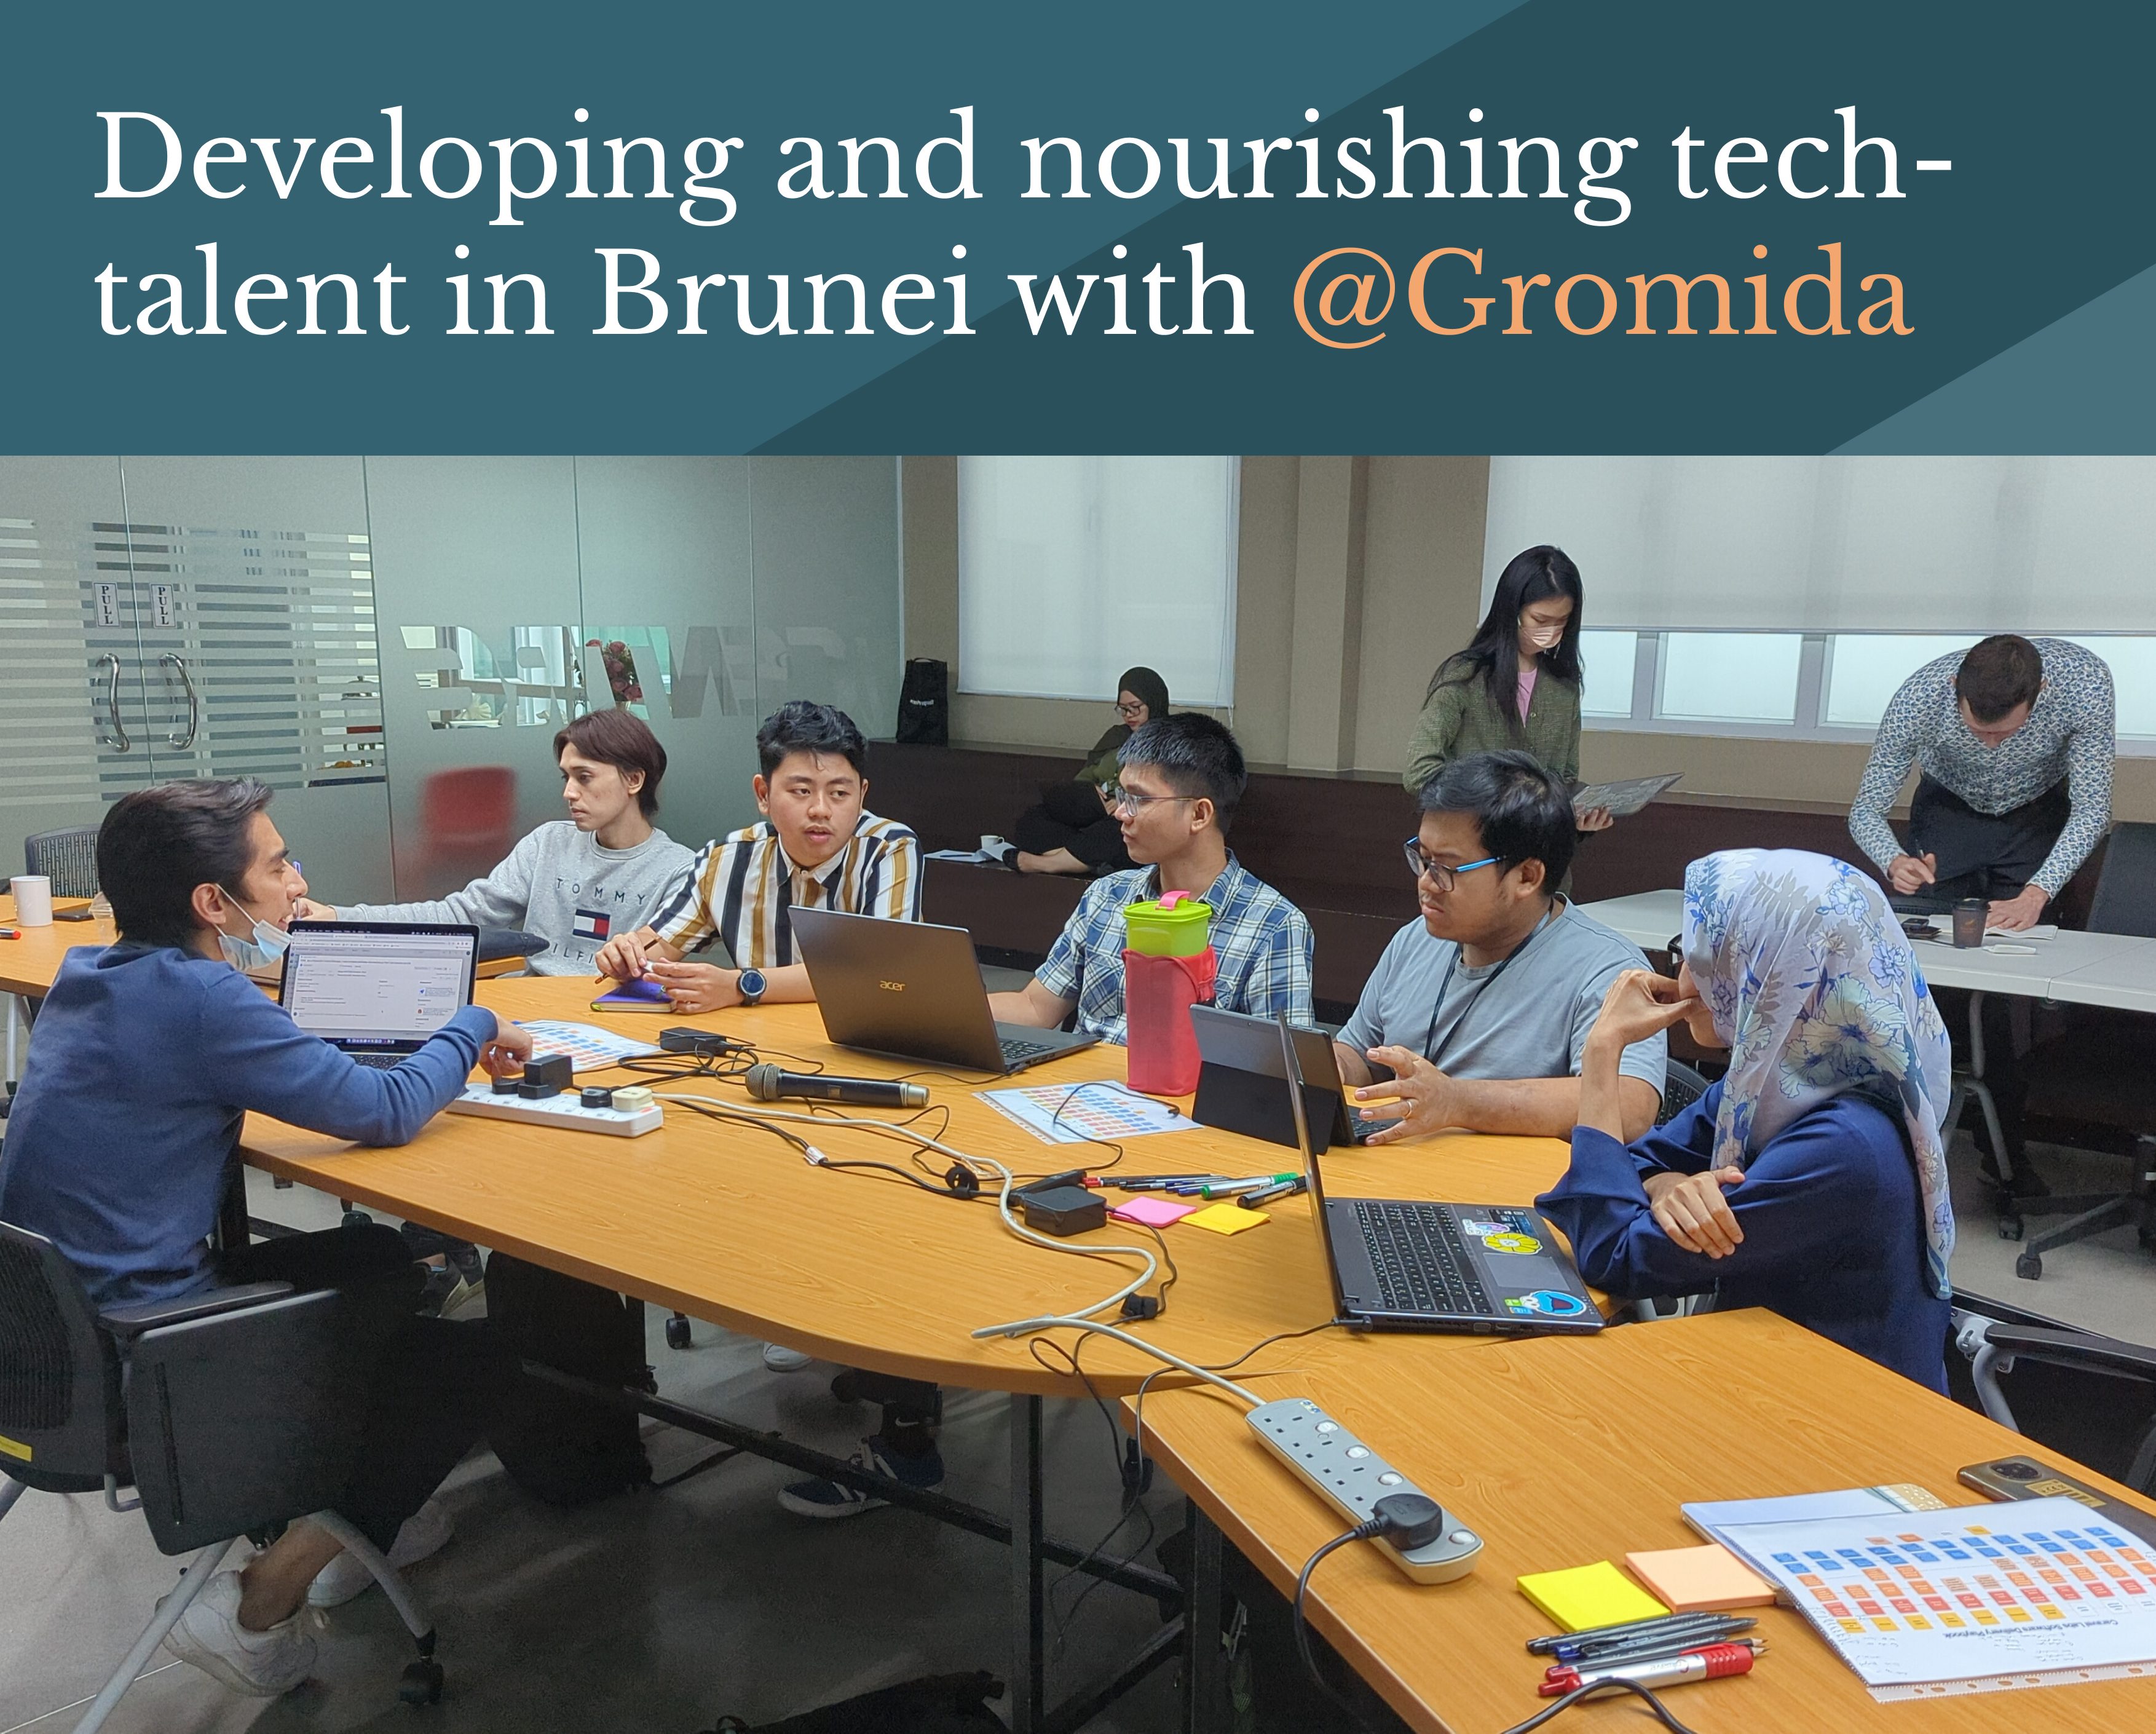 Developing and nourishing tech-talent in Brunei with @Gromida